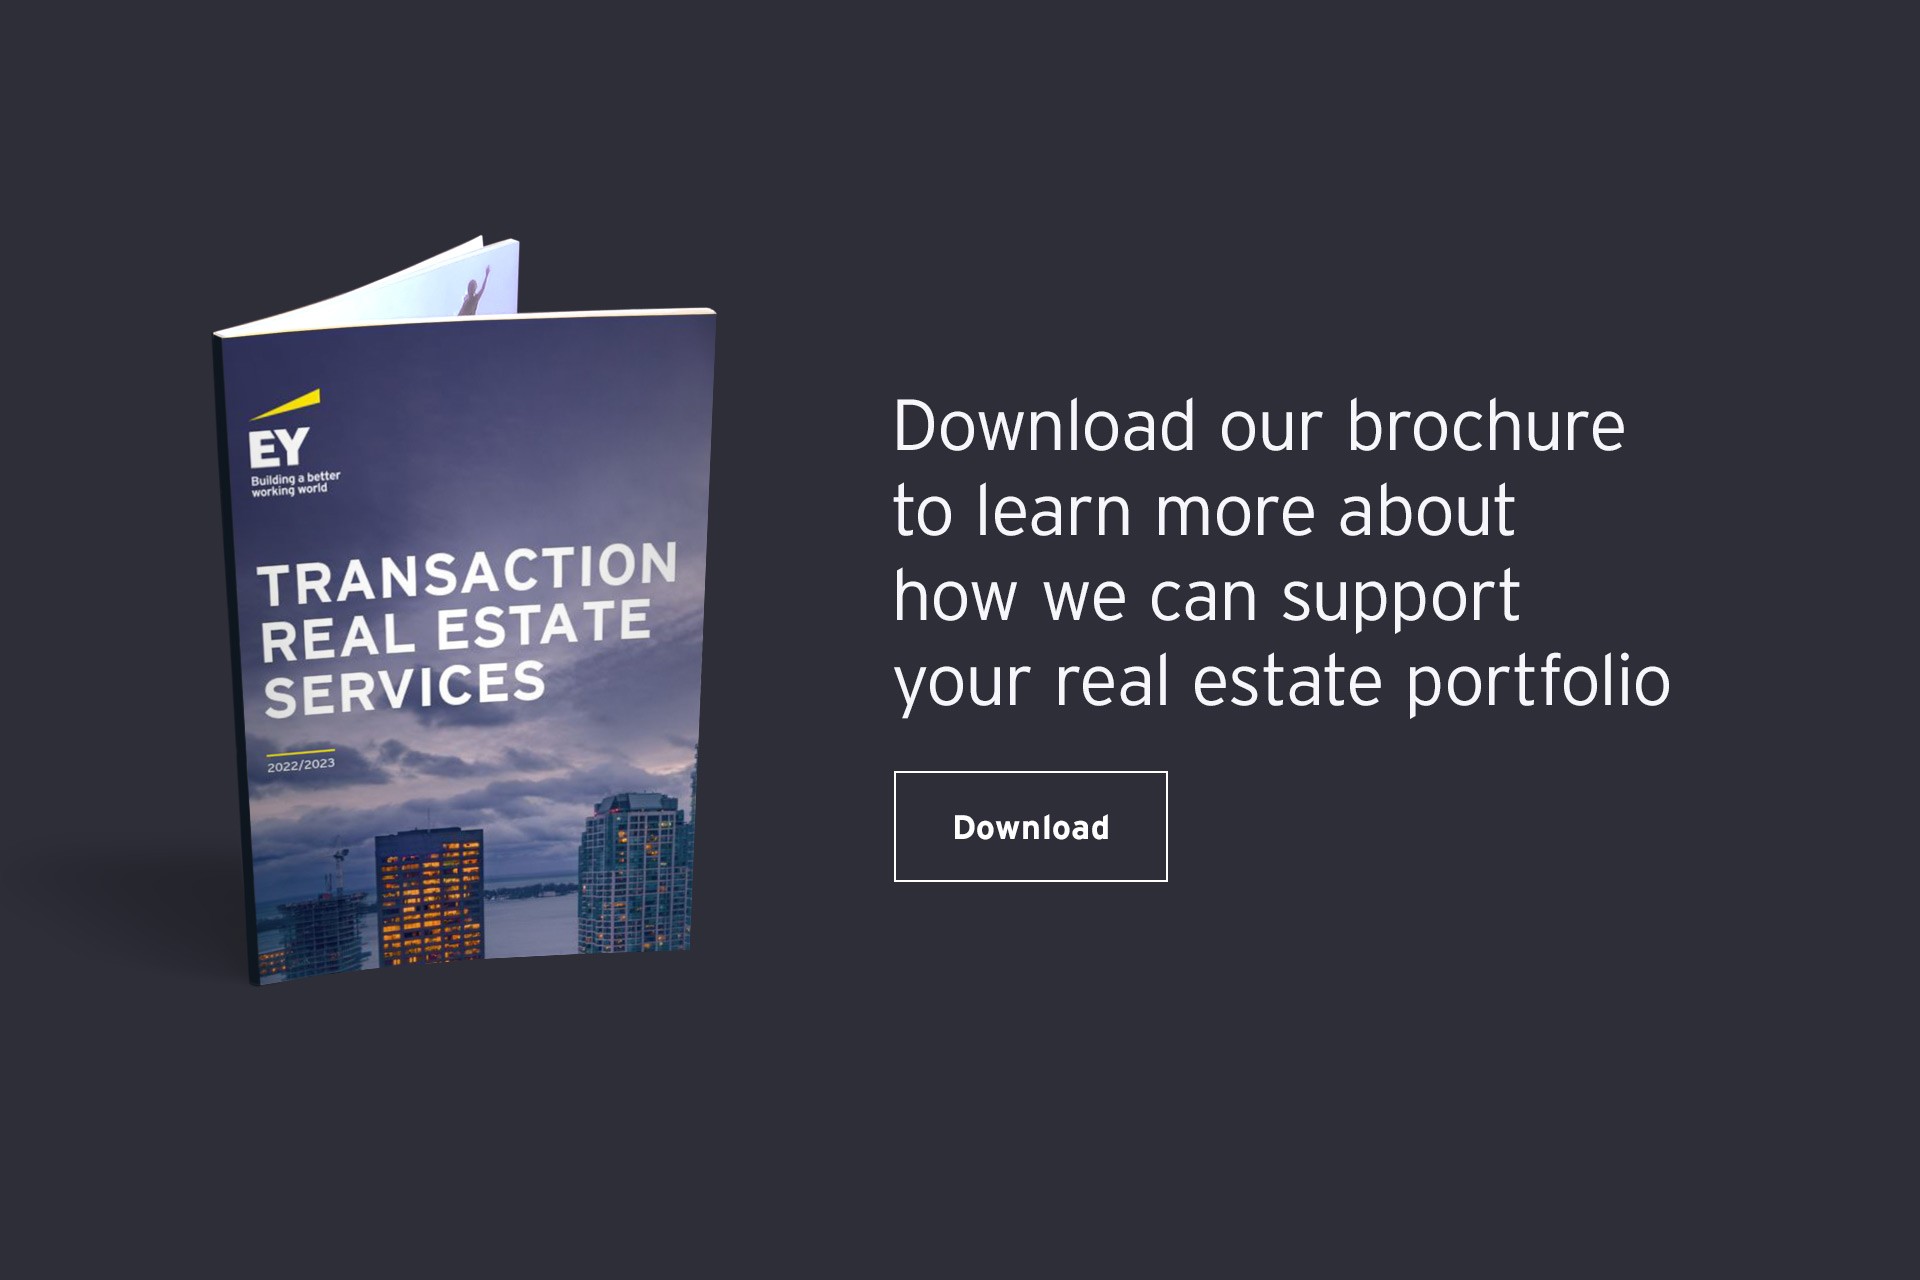 Download our Transaction Real Estate Services brochure